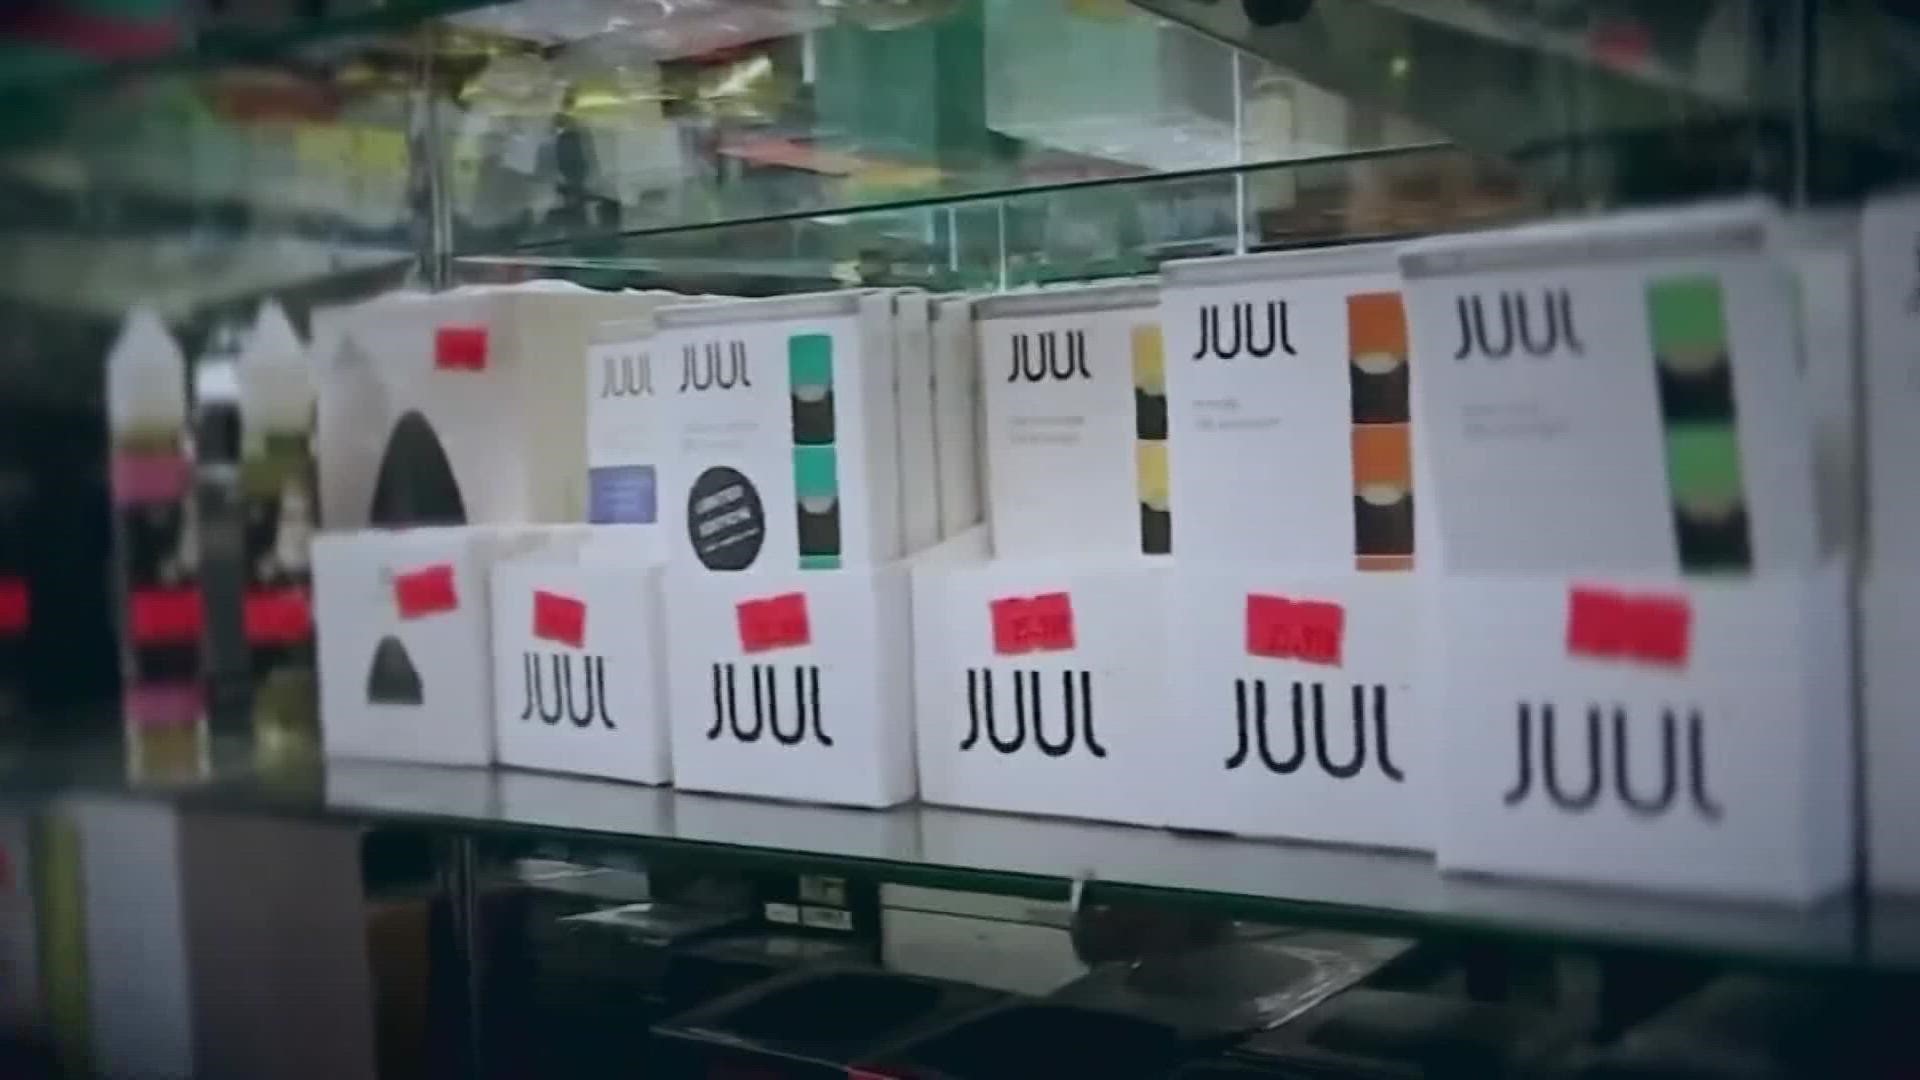 Parents, politicians and anti-tobacco advocates wanted a ban on the Juul devices that many blame for the rise in underage vaping.